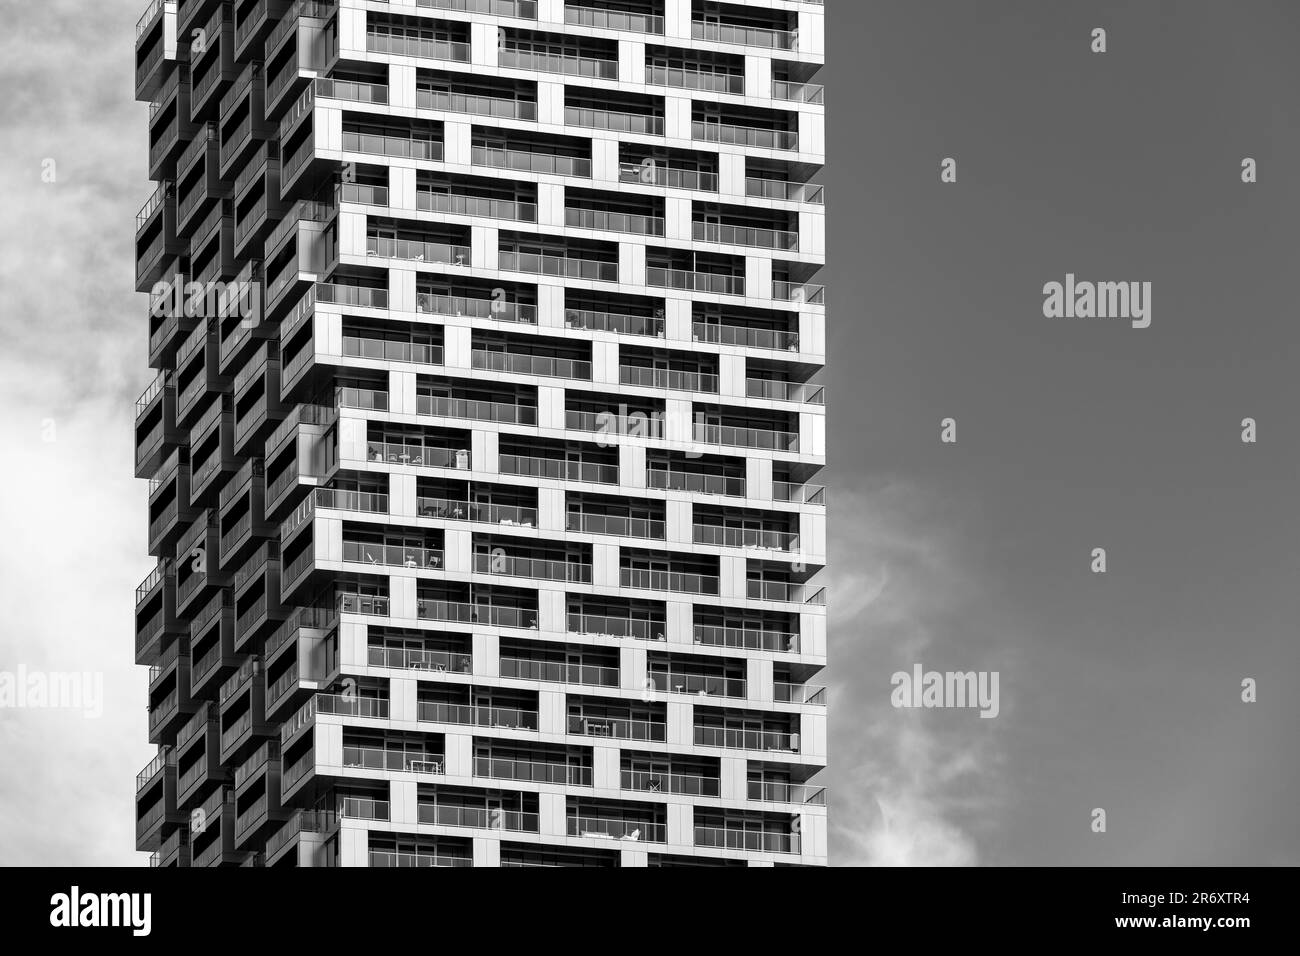 Modern apartment building in black and white, Vancouver, British Columbia, Canada. Stock Photo